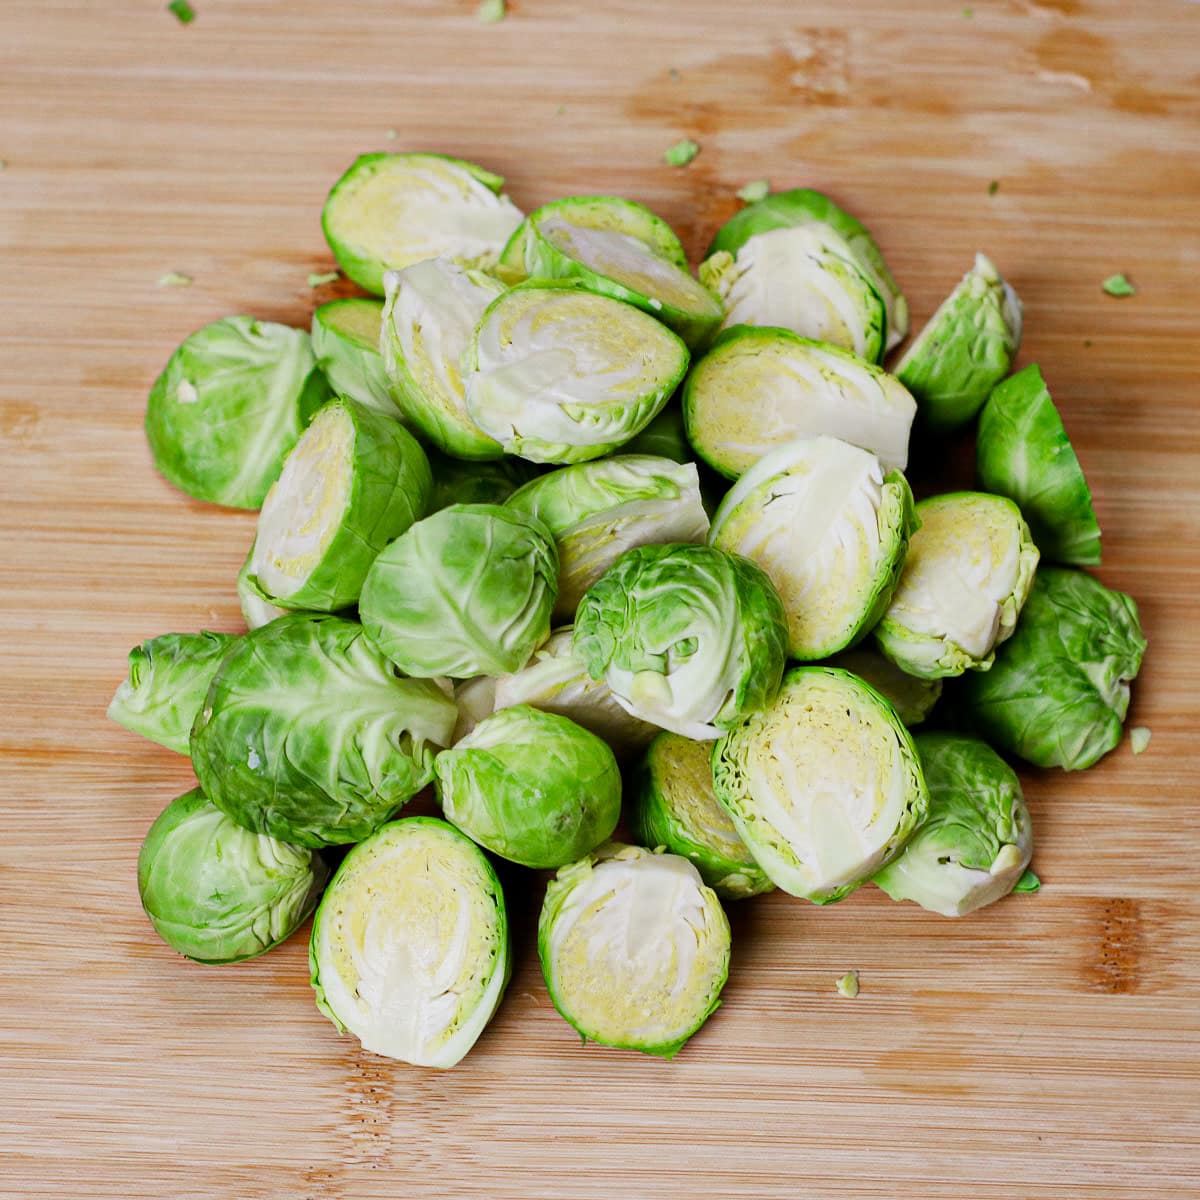 Brussels sprouts sliced in half